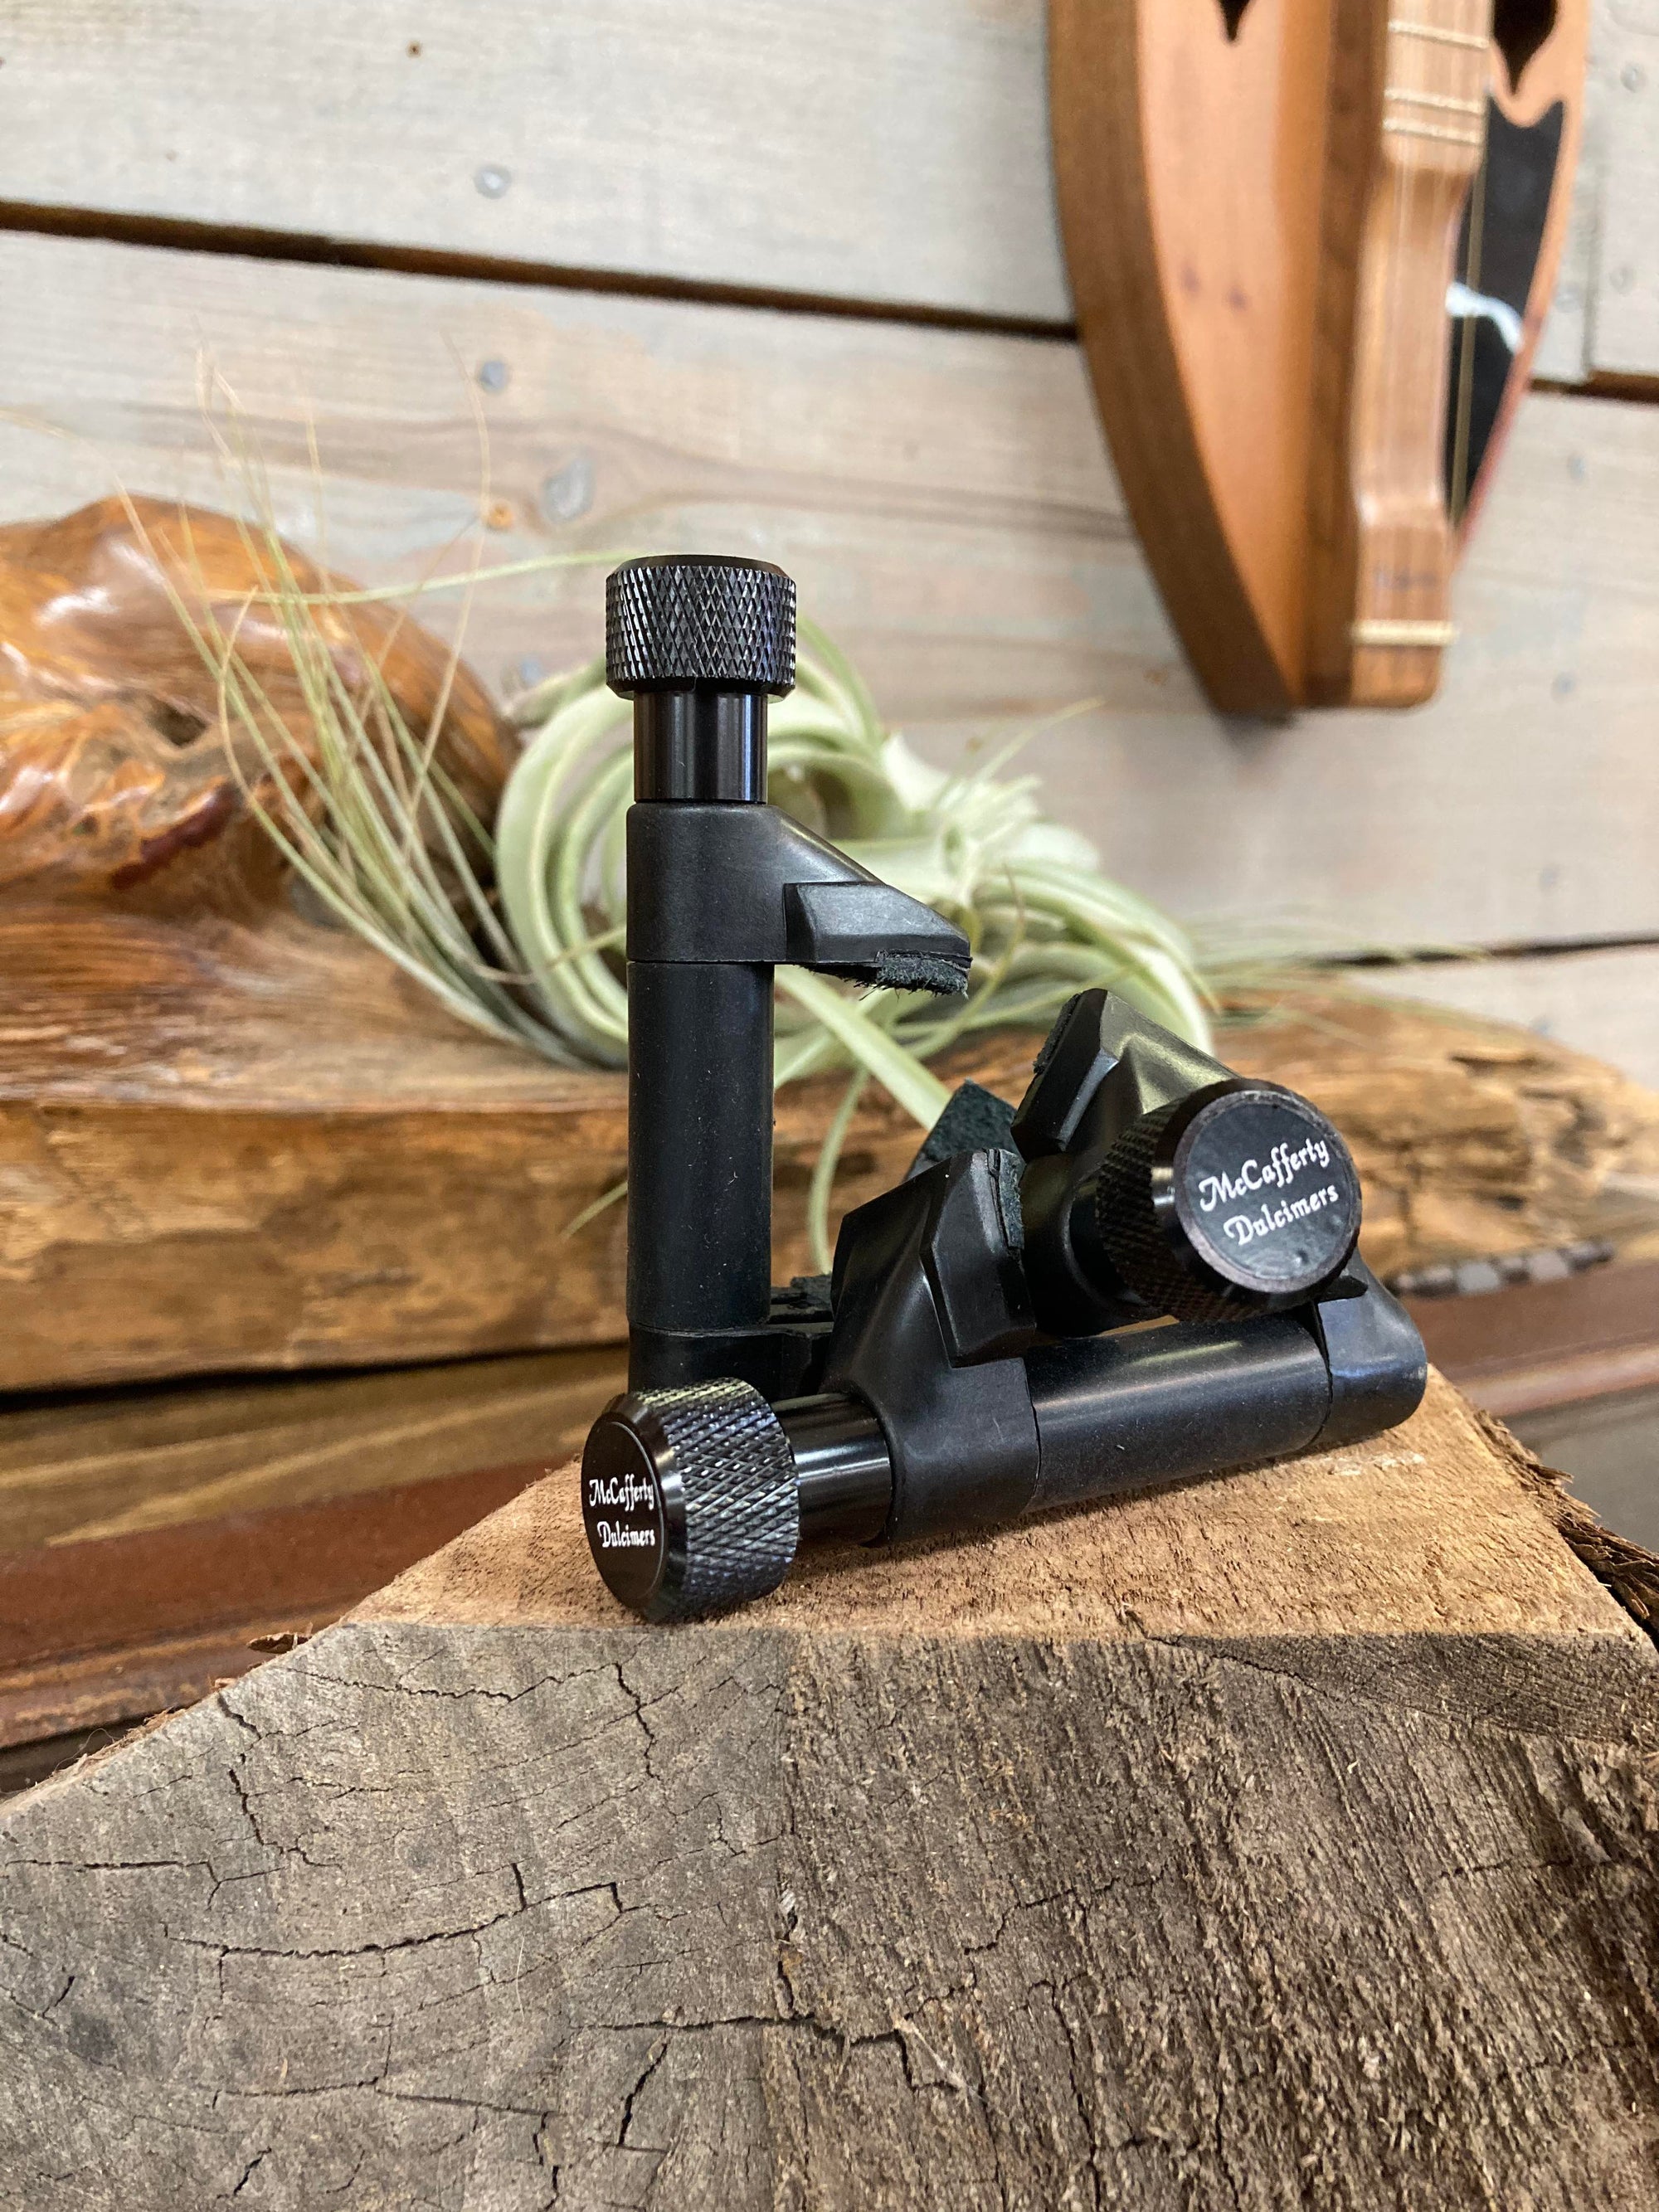 Fly tying vise with a large knob on a wooden surface with decorative greenery in the background, using McCafferty Capos.